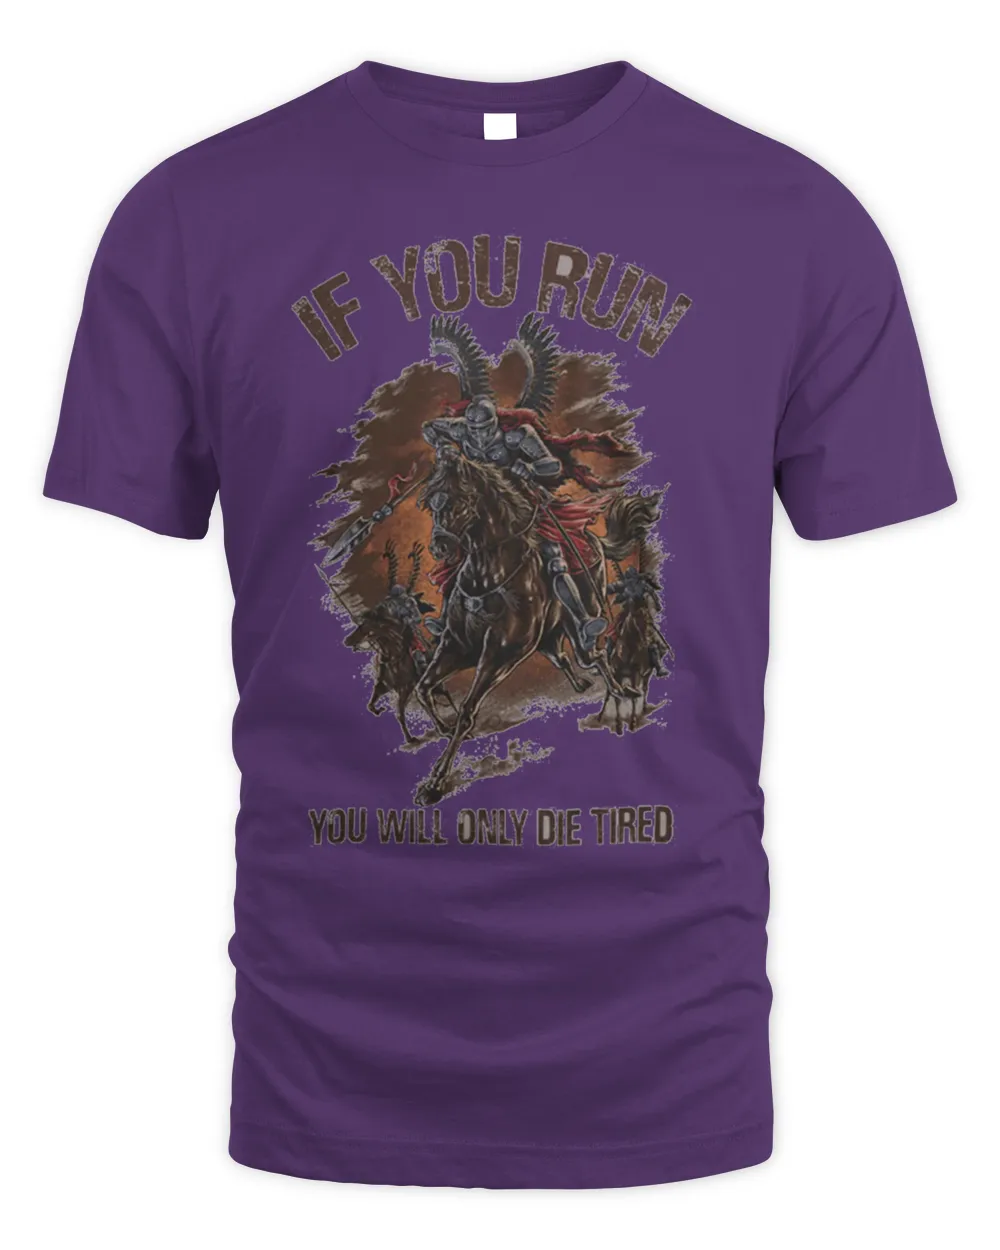 If you run, you will only die tired Shirt